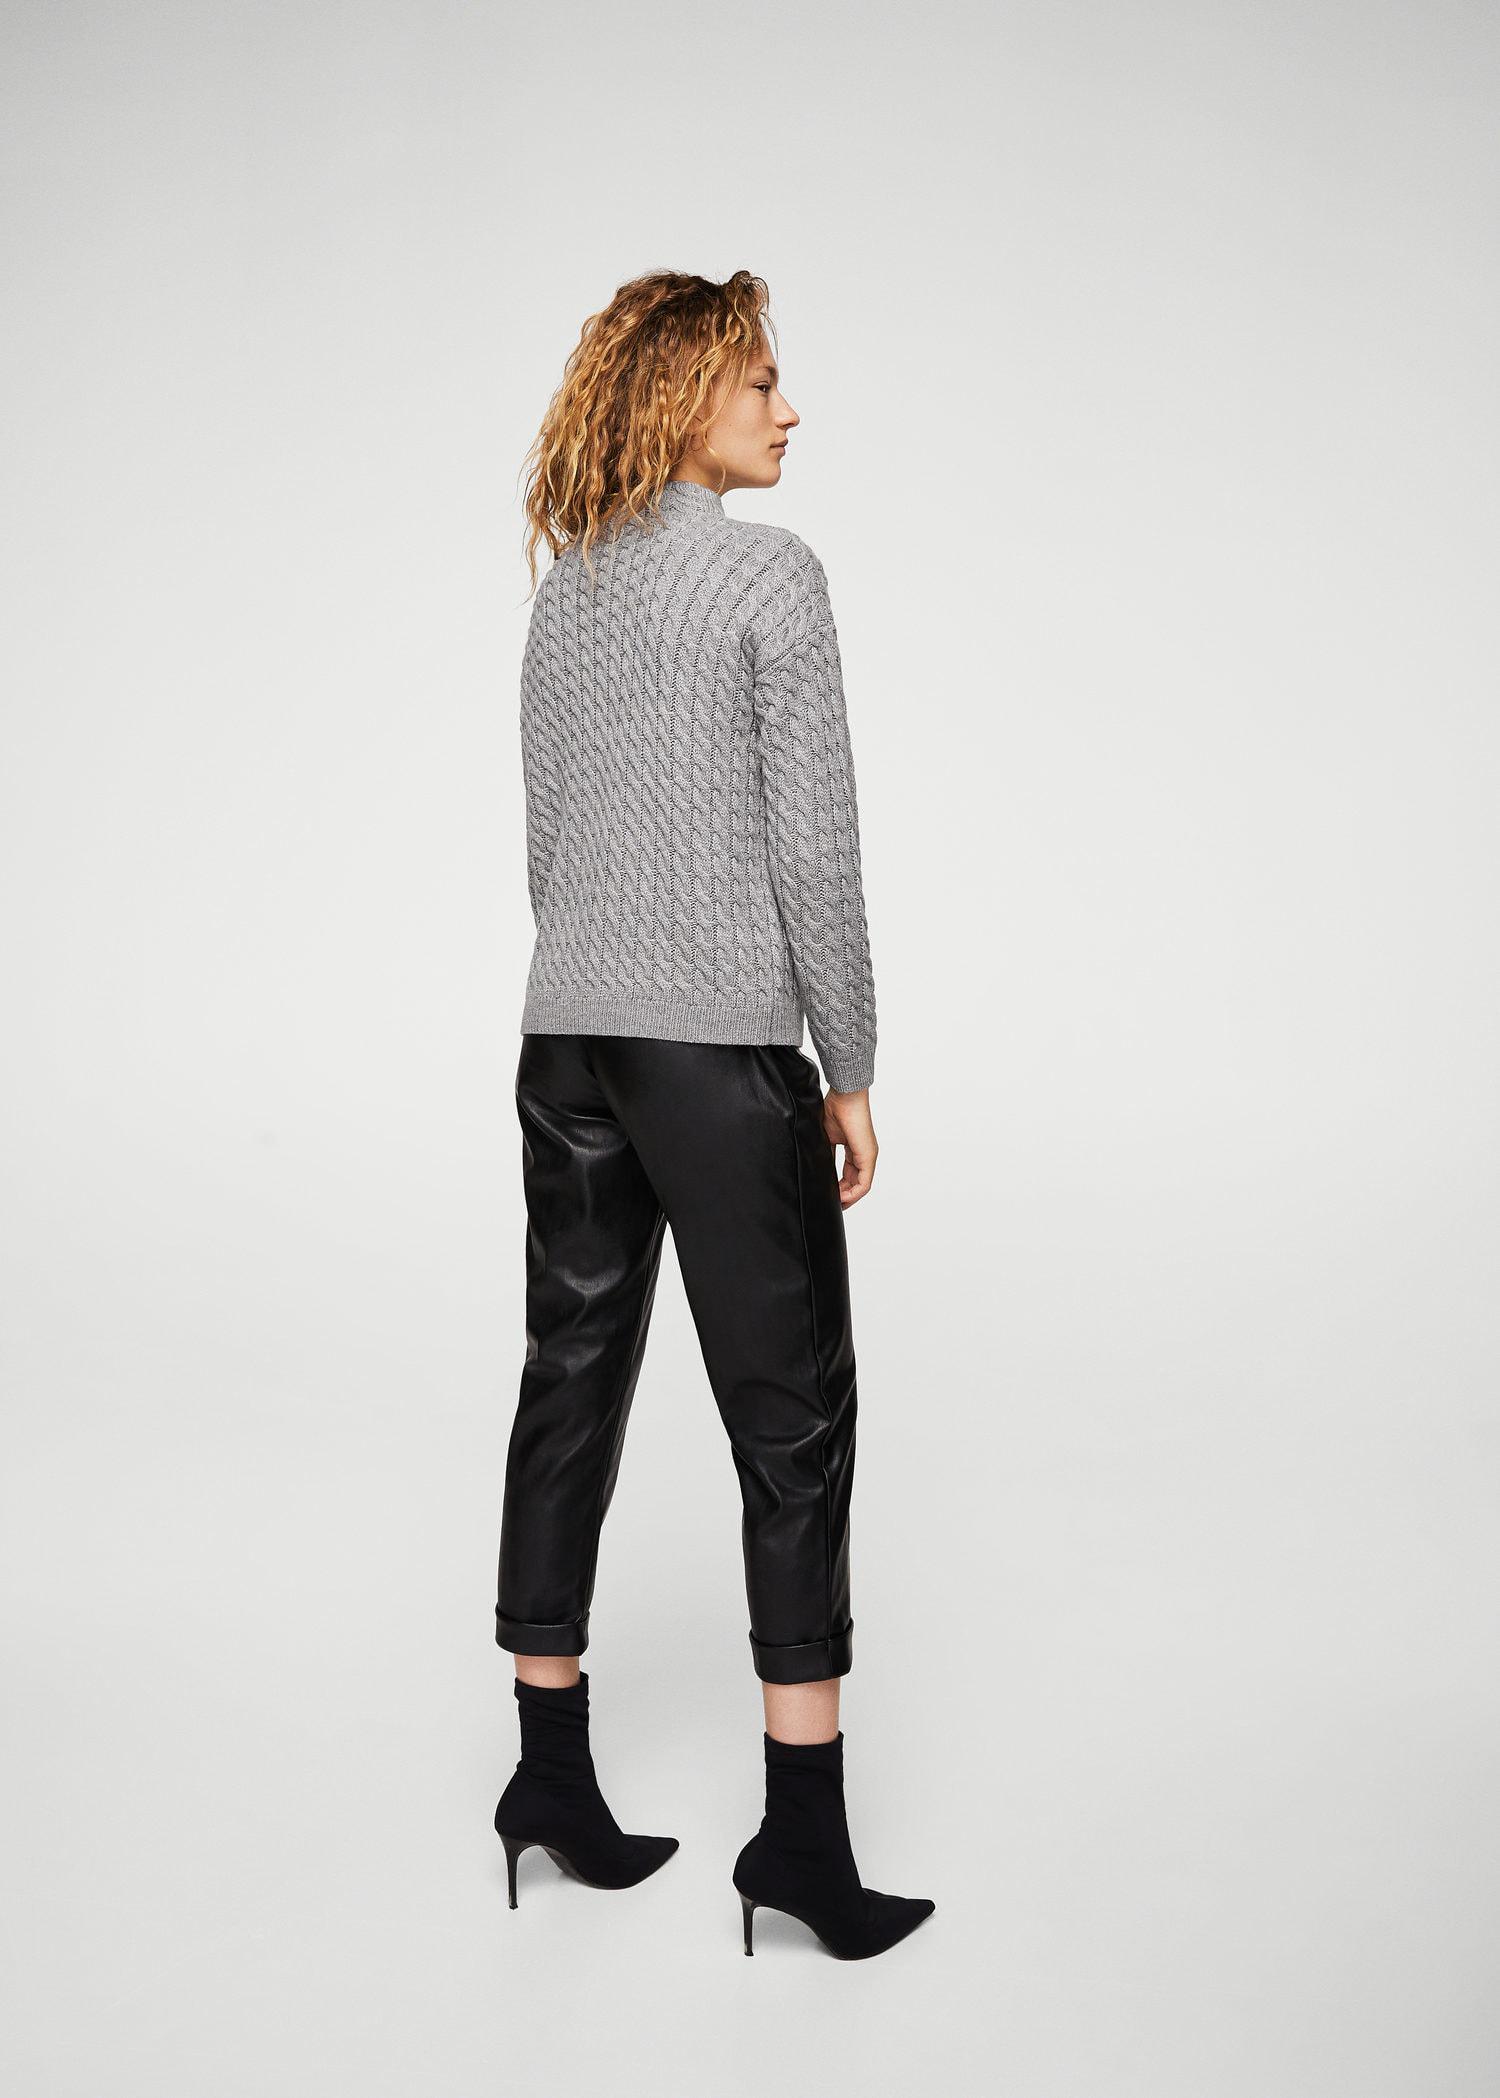 Lyst - Mango Knitted Braided Sweater in Gray